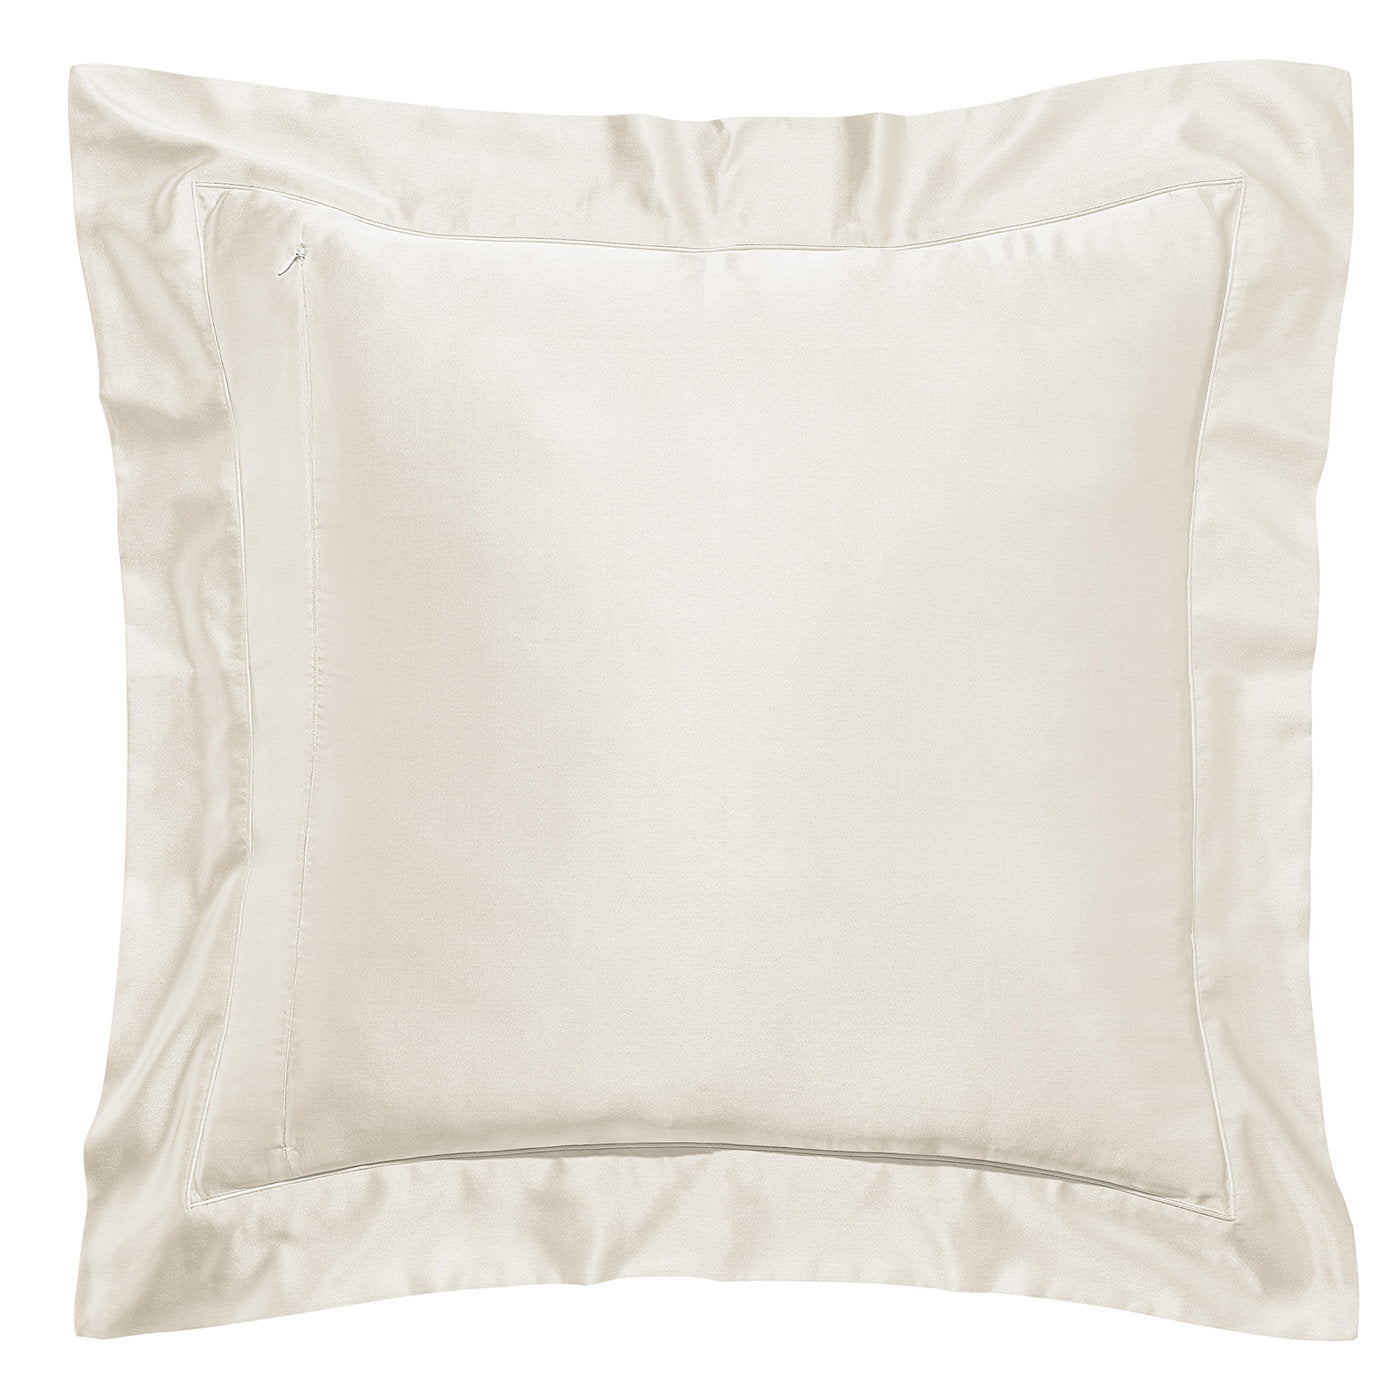 Solid Ivory Pillow Case  - Alternative view 1